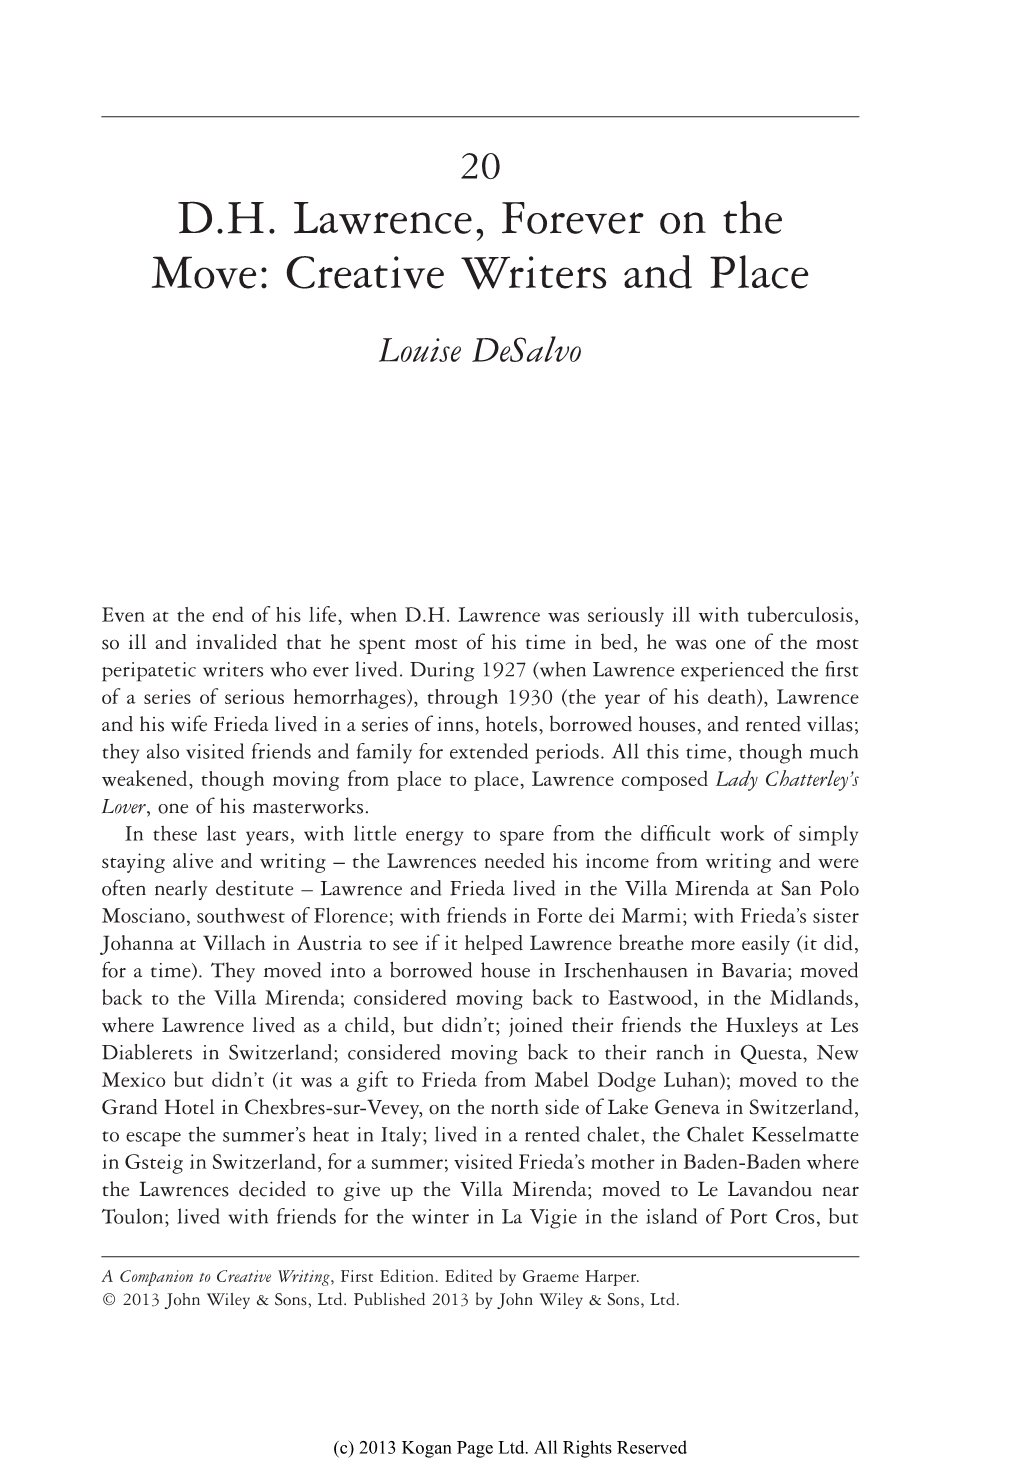 D.H. Lawrence, Forever on the Move: Creative Writers and Place Louise Desalvo